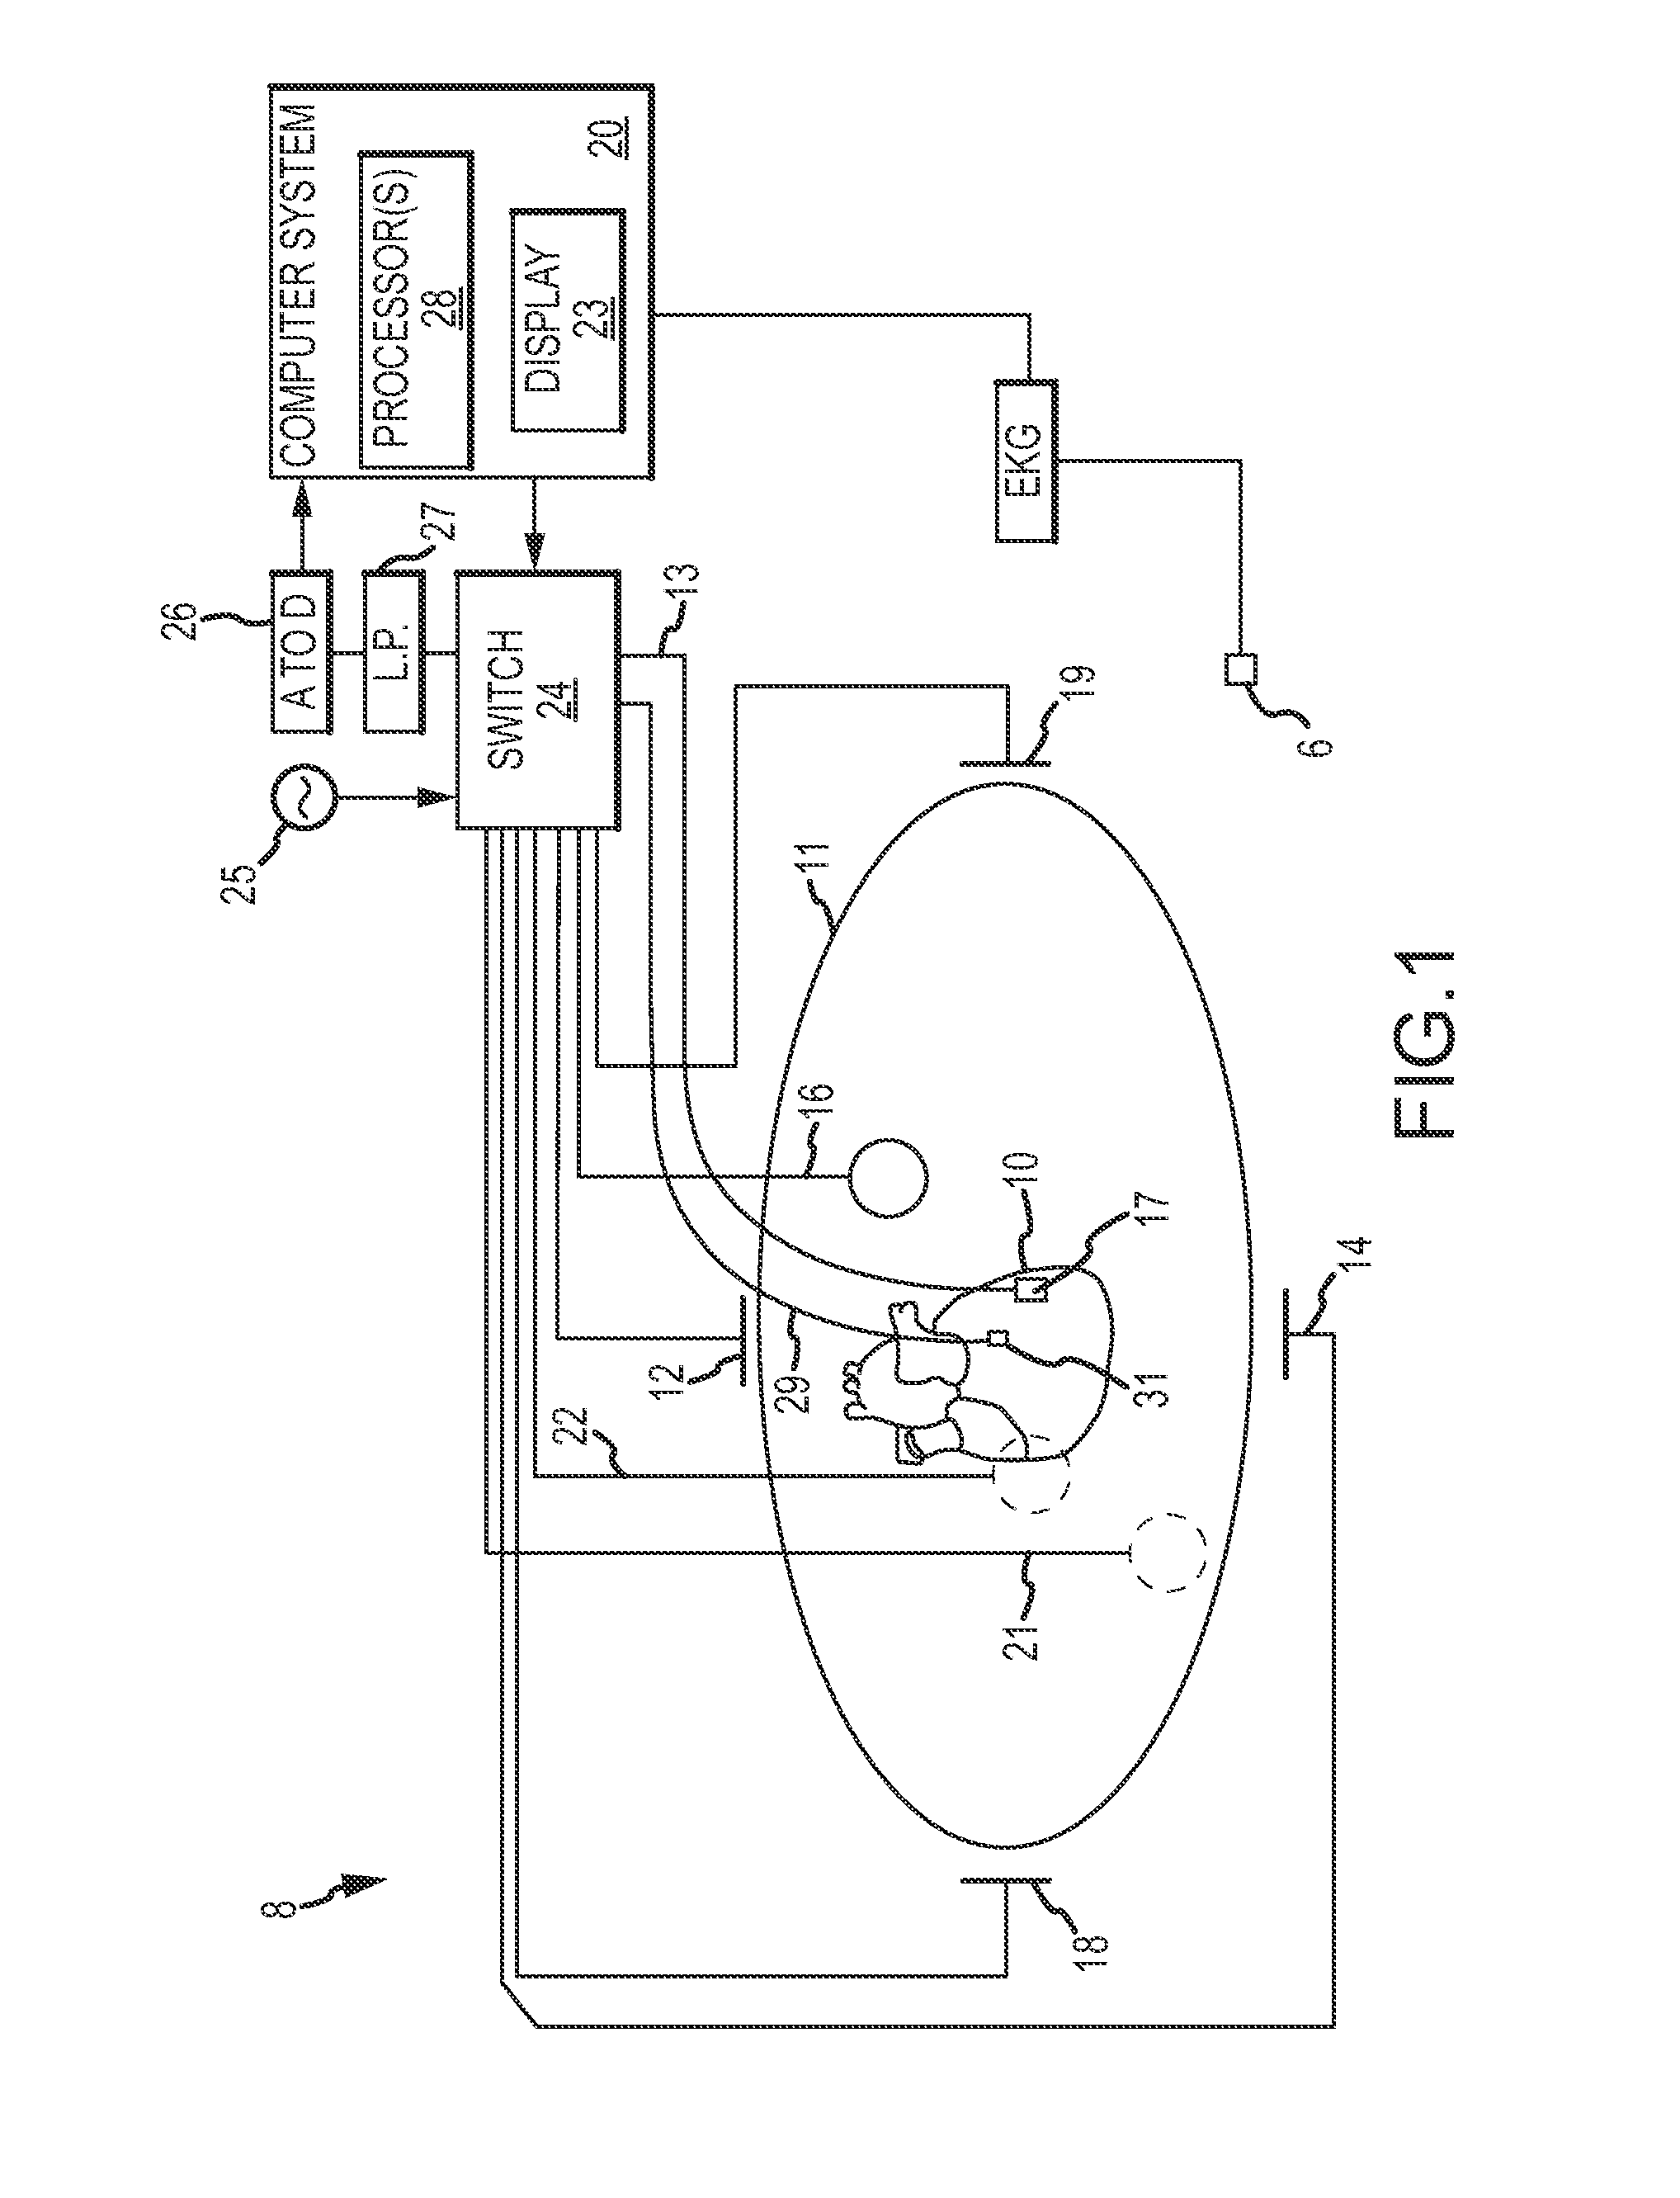 Methods and systems for mapping local conduction velocity